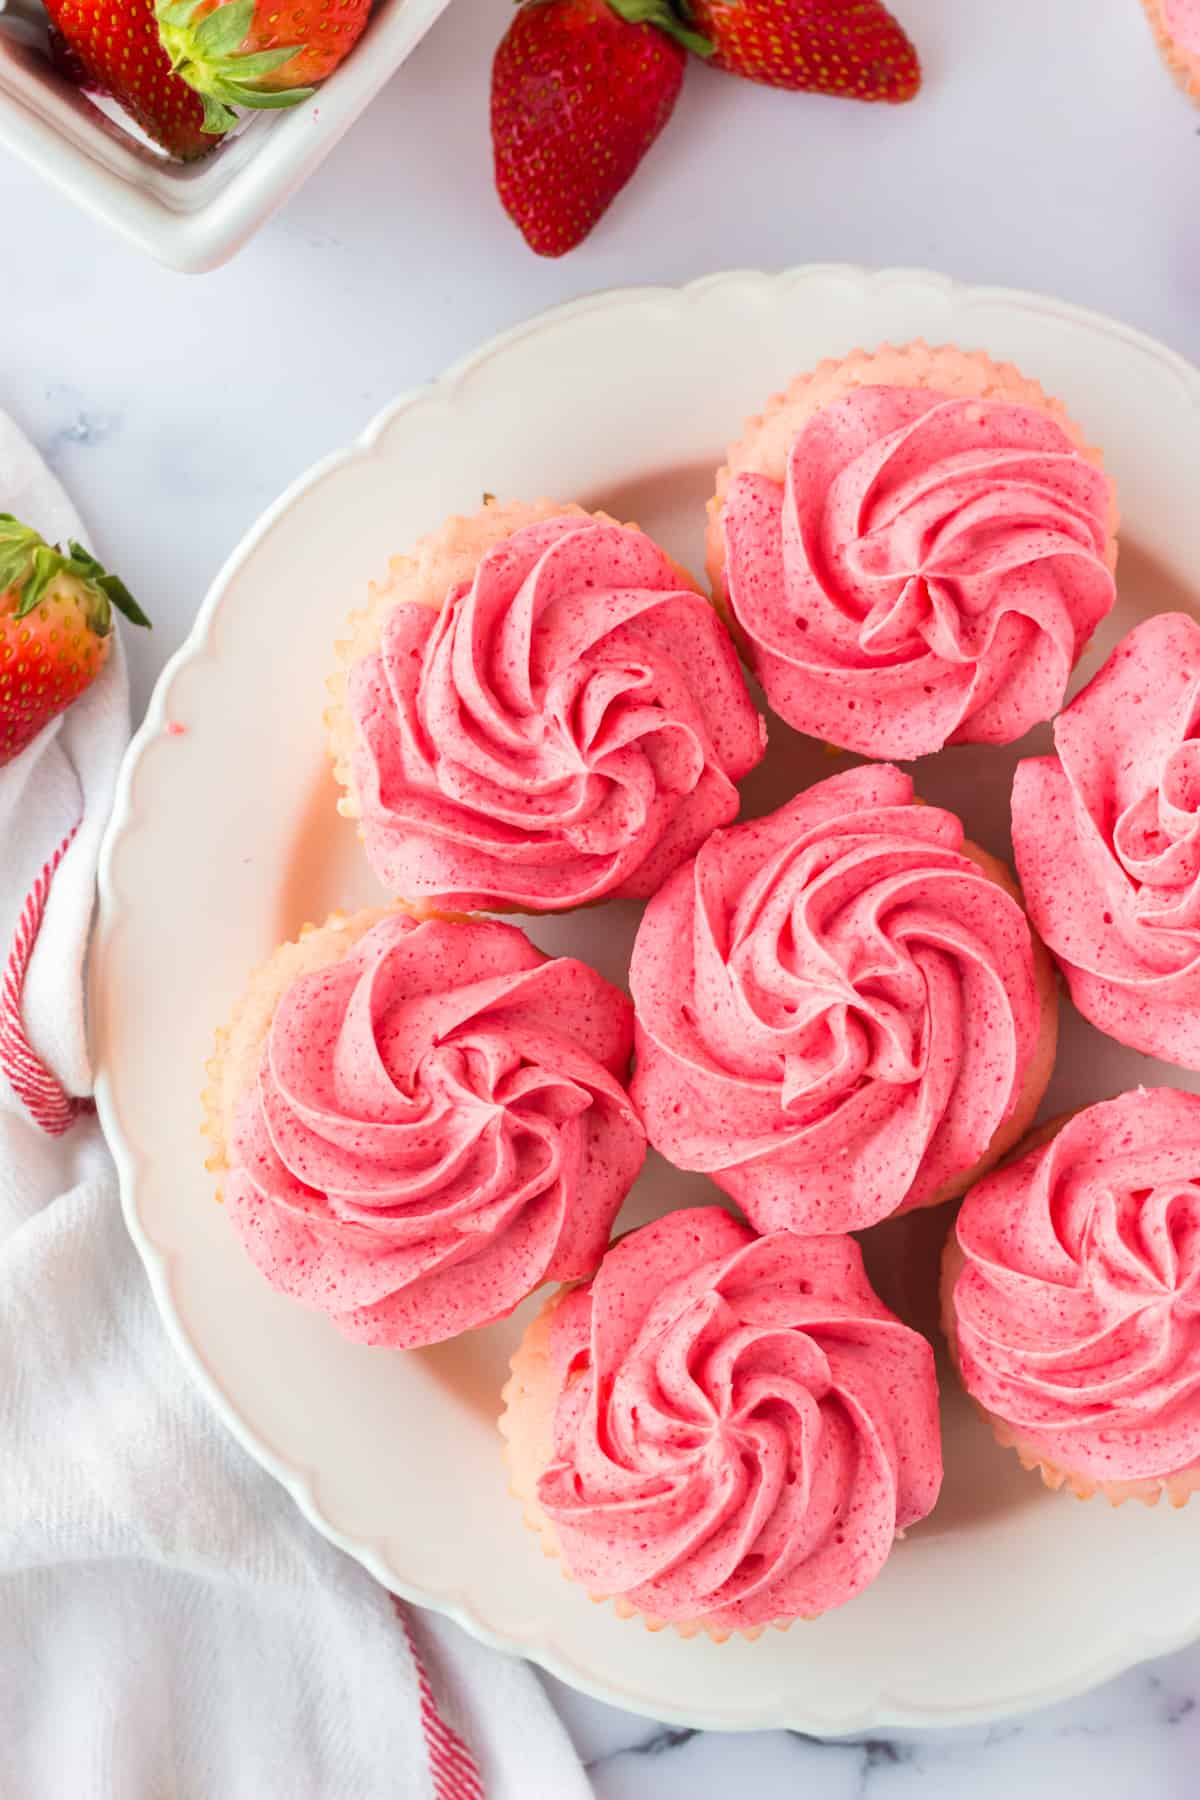 cupcakes with pink frosting arranged in a circle on white plate with strawberries in background